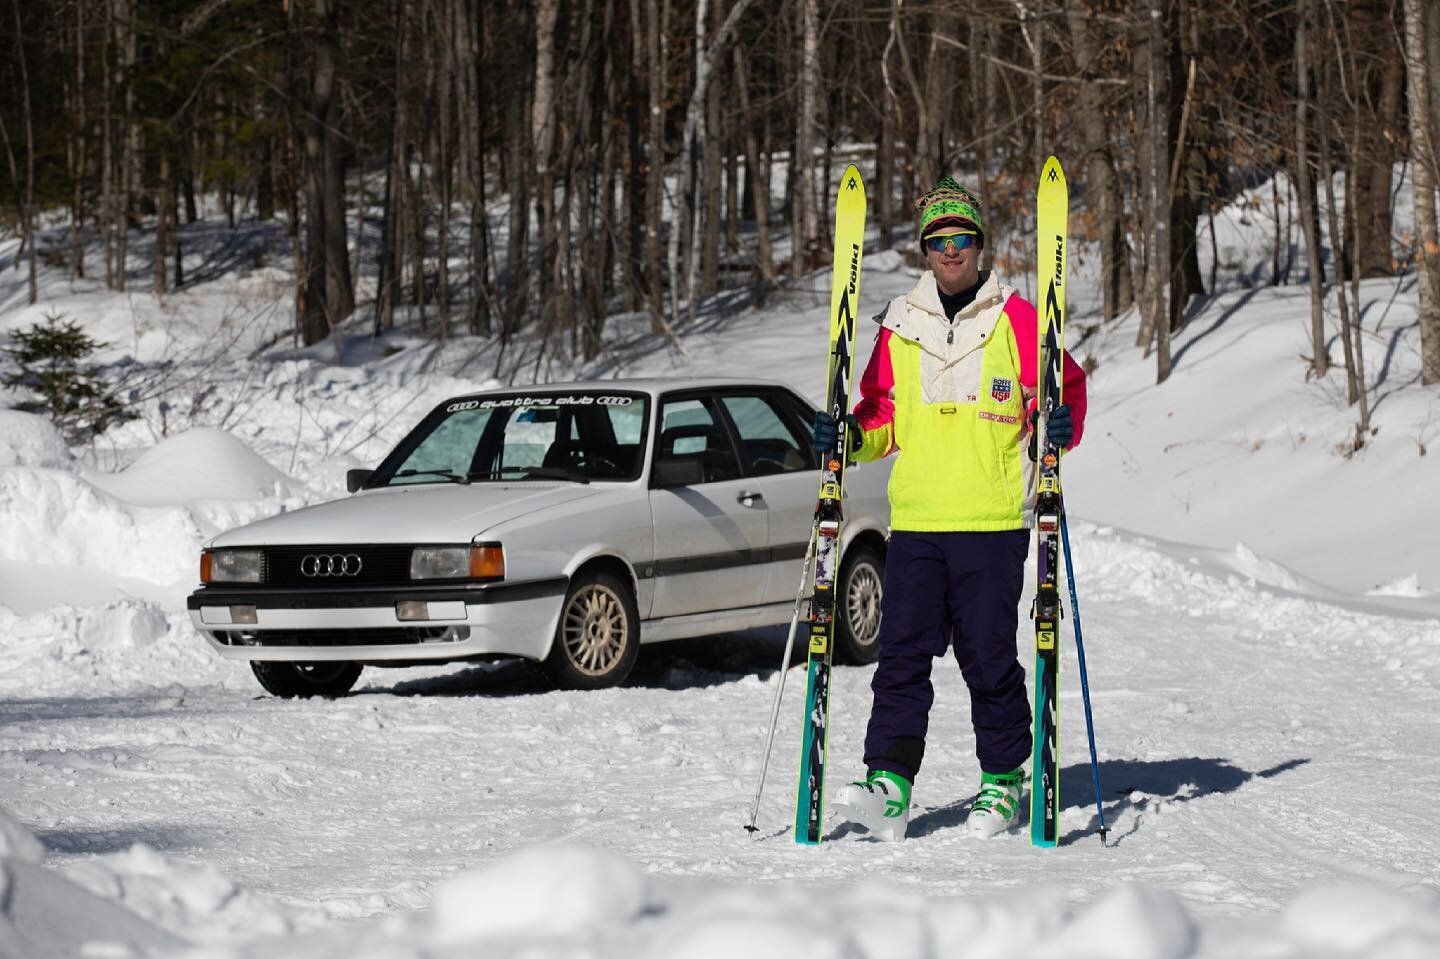 Tomorrow, the final episode of RadVentures premieres on @hagerty! Let me tell you, it&rsquo;s very much up my alley. Rallying Audi&rsquo;s and skiing like it&rsquo;s 1993! Add in some 200cm @volklskis_usa and an old Roffe jacket and it can&rsquo;t re